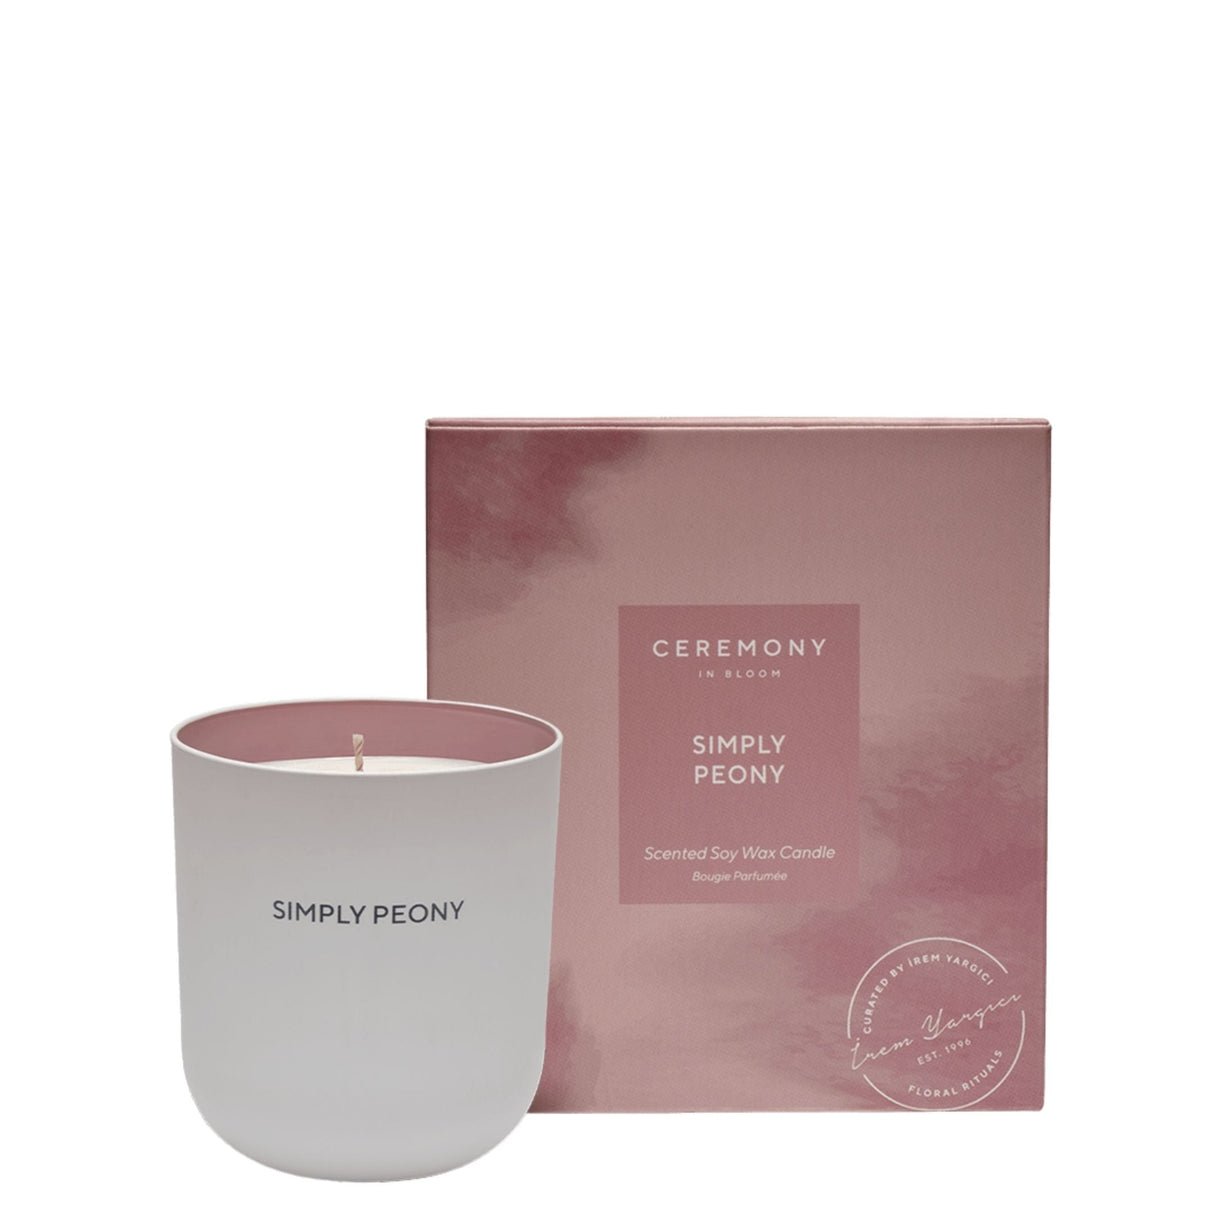 Ceremony In Bloom - Simply Peony Scented Soy Wax Candle 240 g - Vitruta